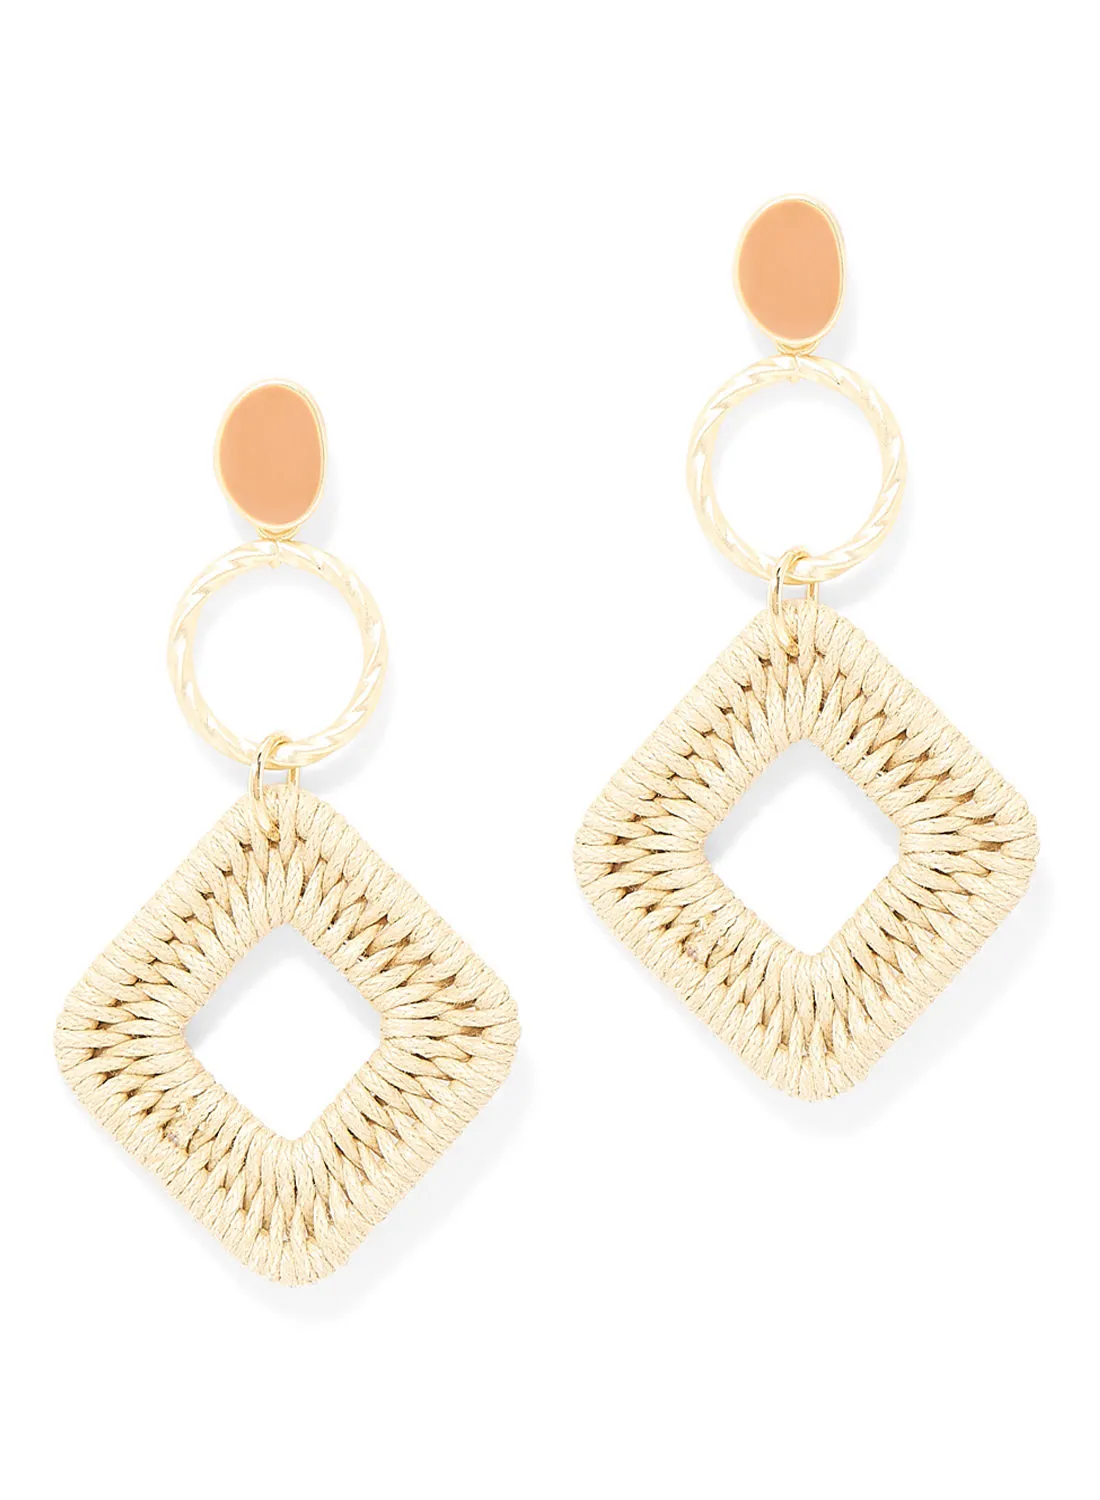 R&B Embellished Dangling Earrings With Pushback Closure